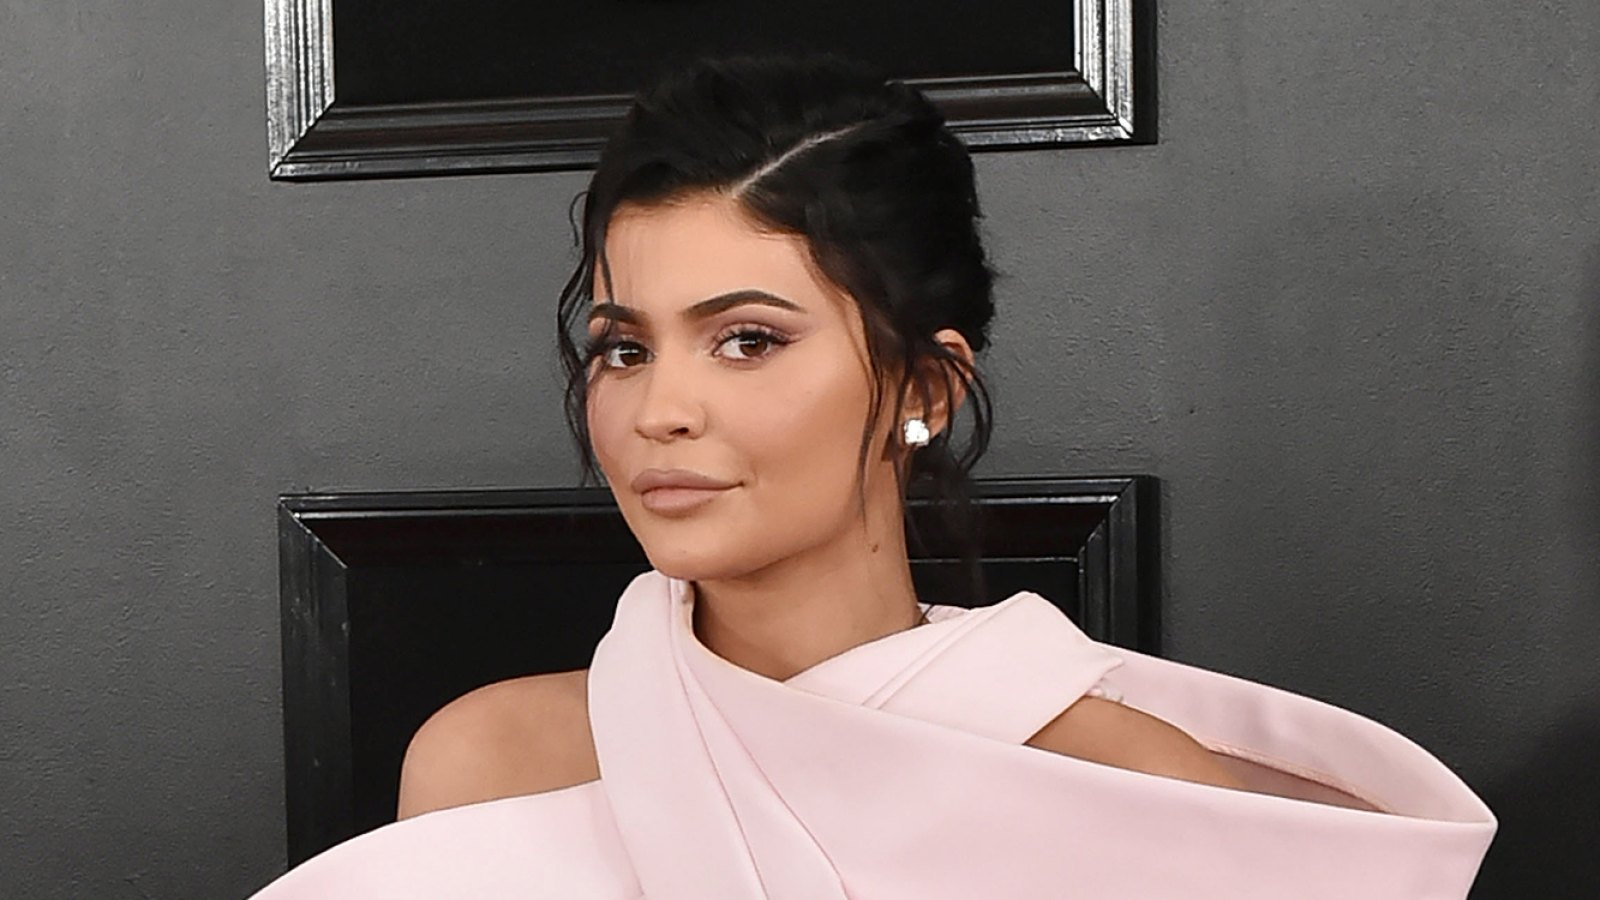 Kylie Jenner Admits She ‘Can’t Say’ She’s a Self-Made Billionaire